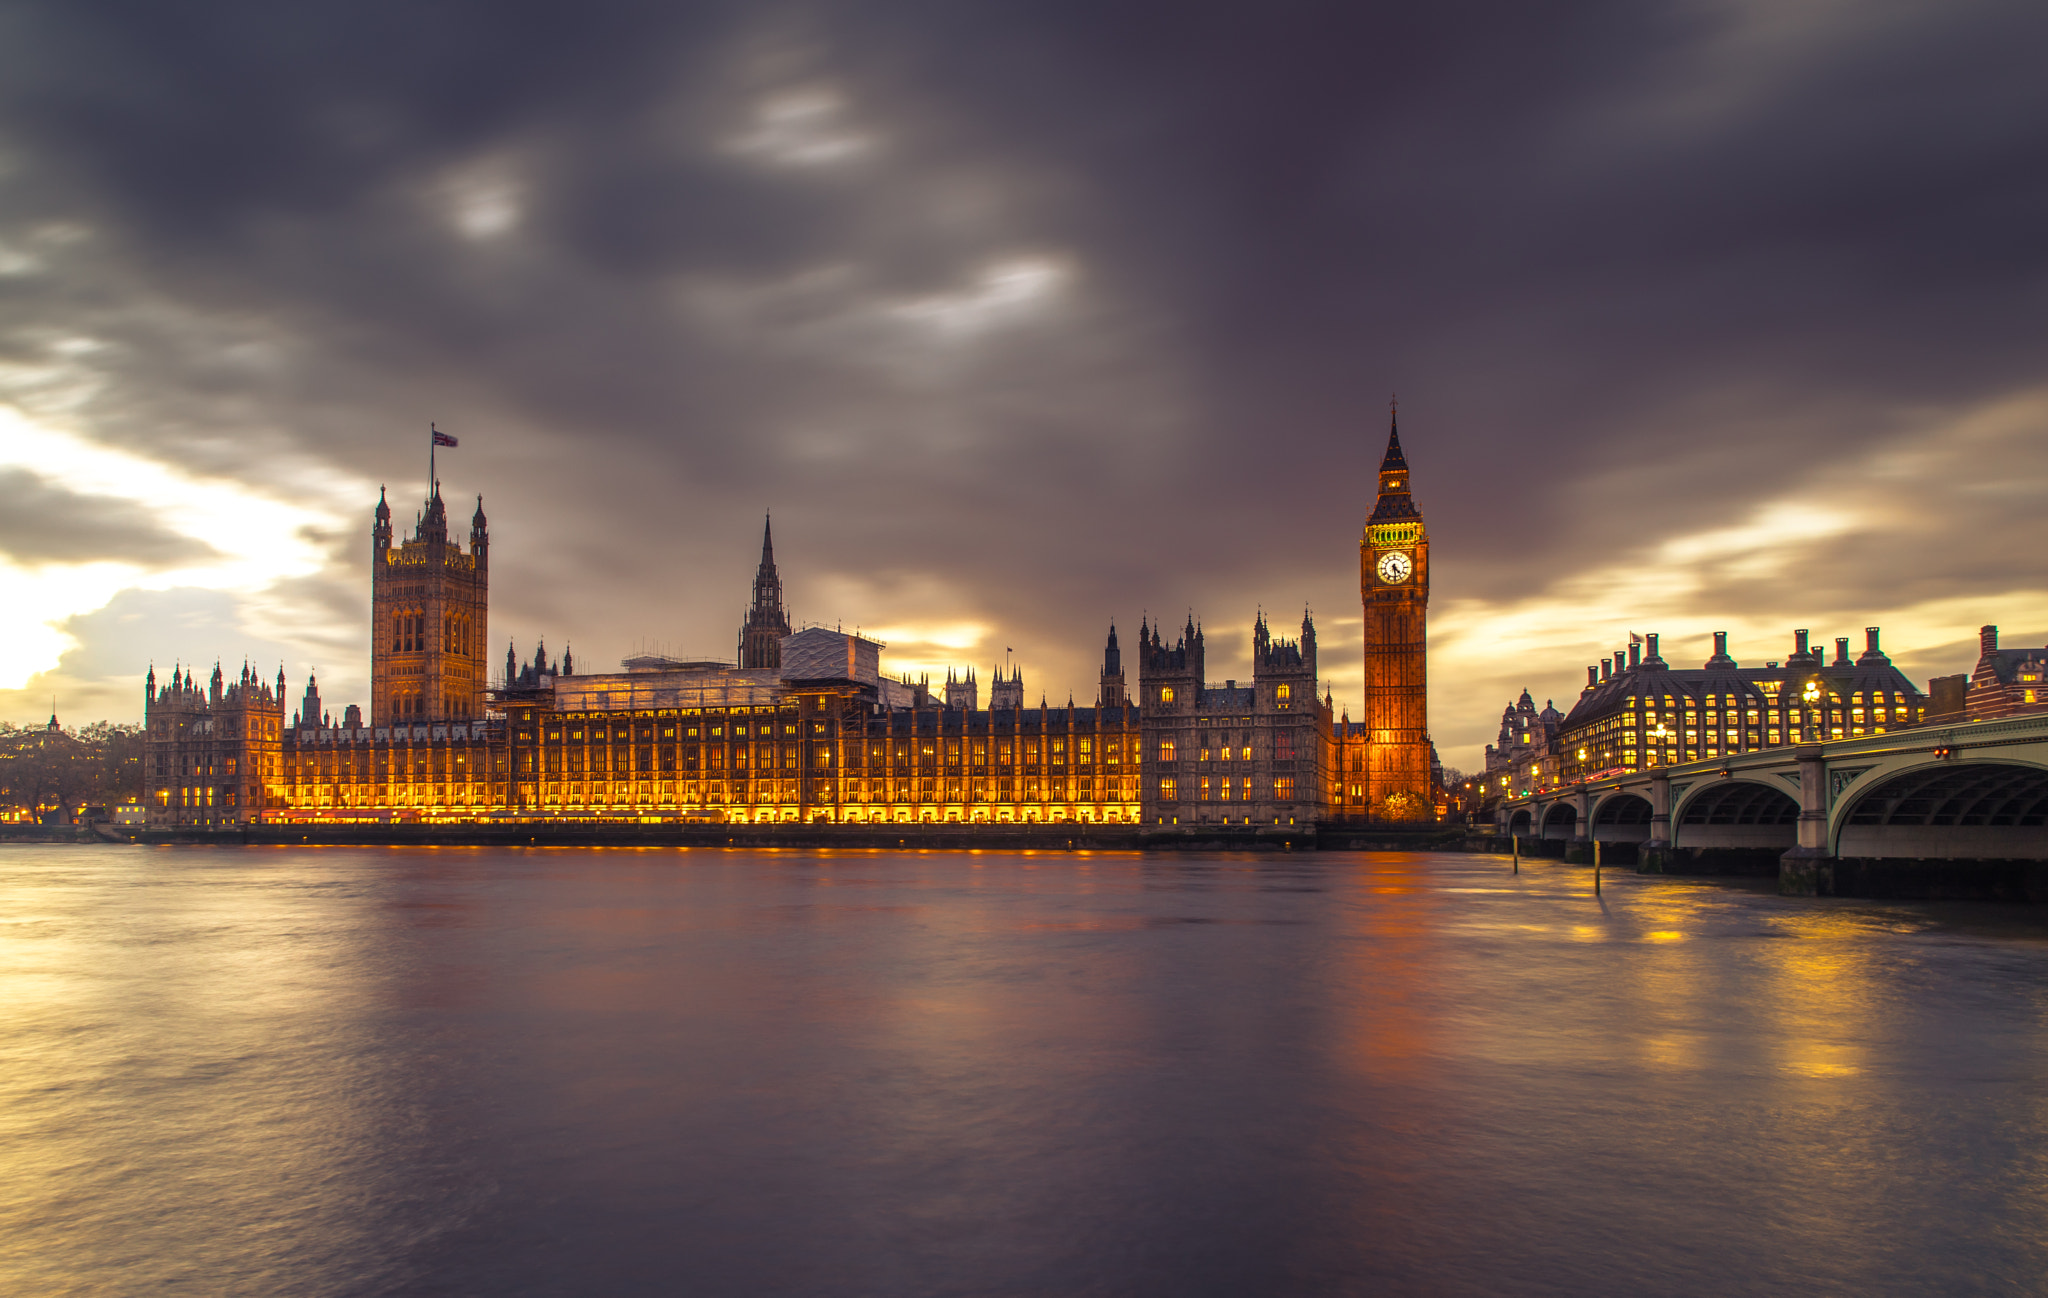 Sony a7 + Tamron SP 24-70mm F2.8 Di VC USD sample photo. Palace of westminster photography